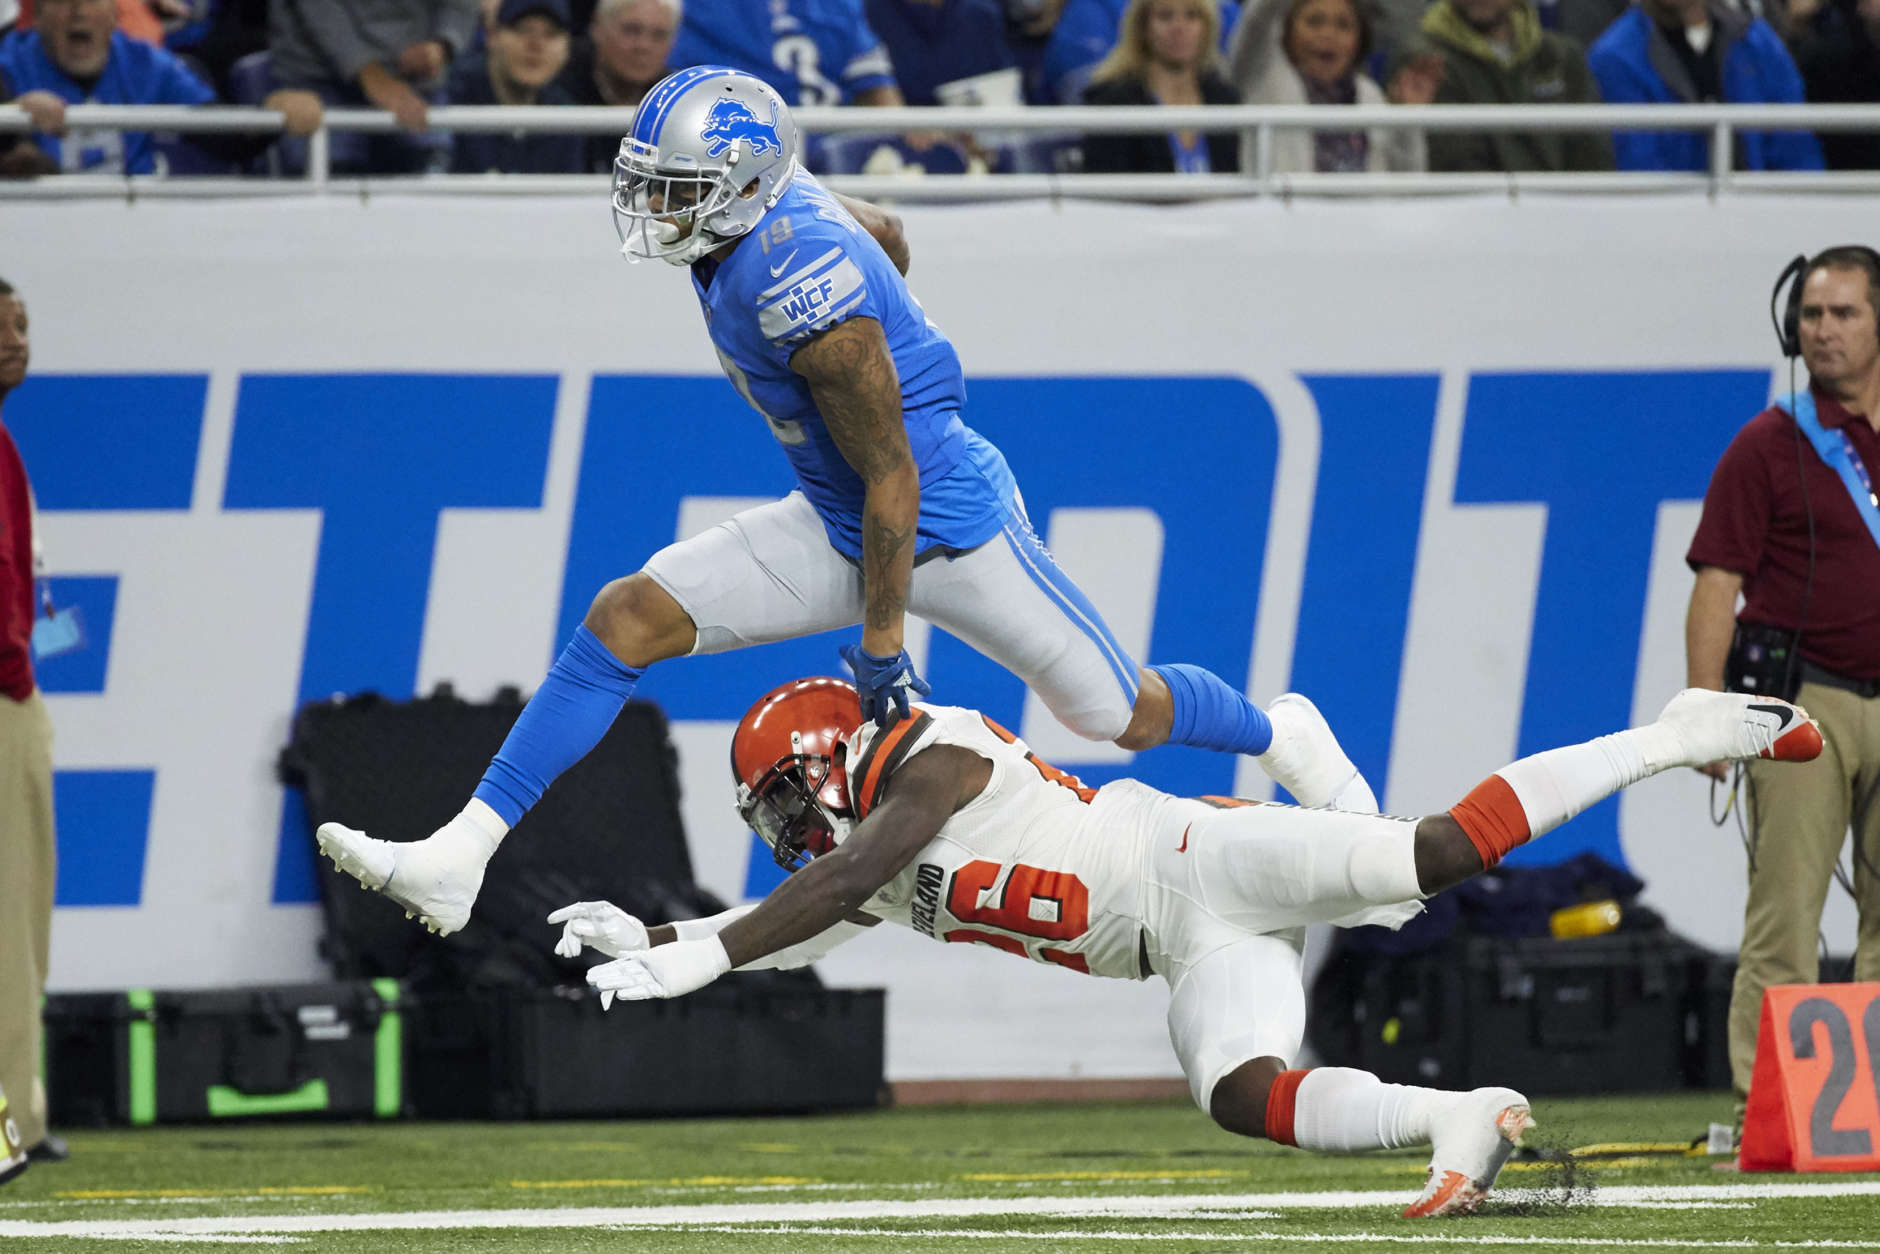 Detroit Lions wide receiver Kenny Golladay (19) leaps over Cleveland Browns strong safety Derrick Kindred (26) during an NFL football game, Sunday, Nov. 12, 2017, in Detroit. (AP Photo/Rick Osentoski)